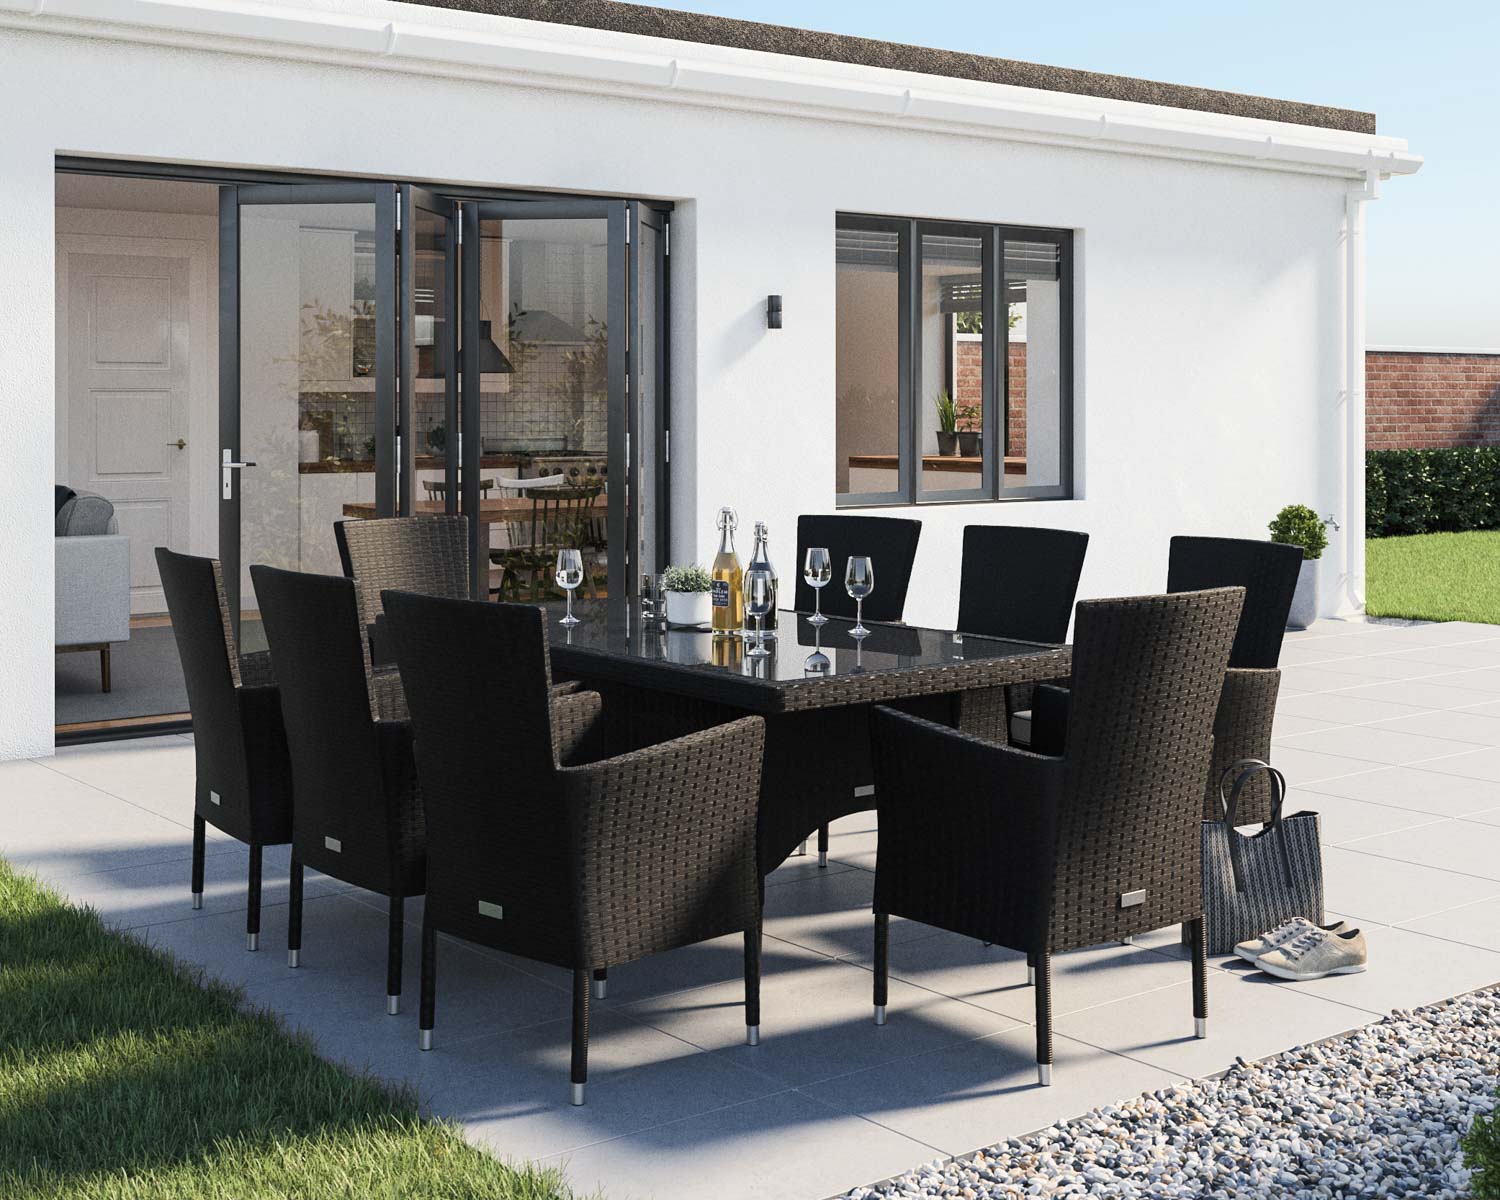 8 Seater Rattan Garden Dining Set With Rectangular Dining Table In Black Amp White Cambridge Rattan Direct